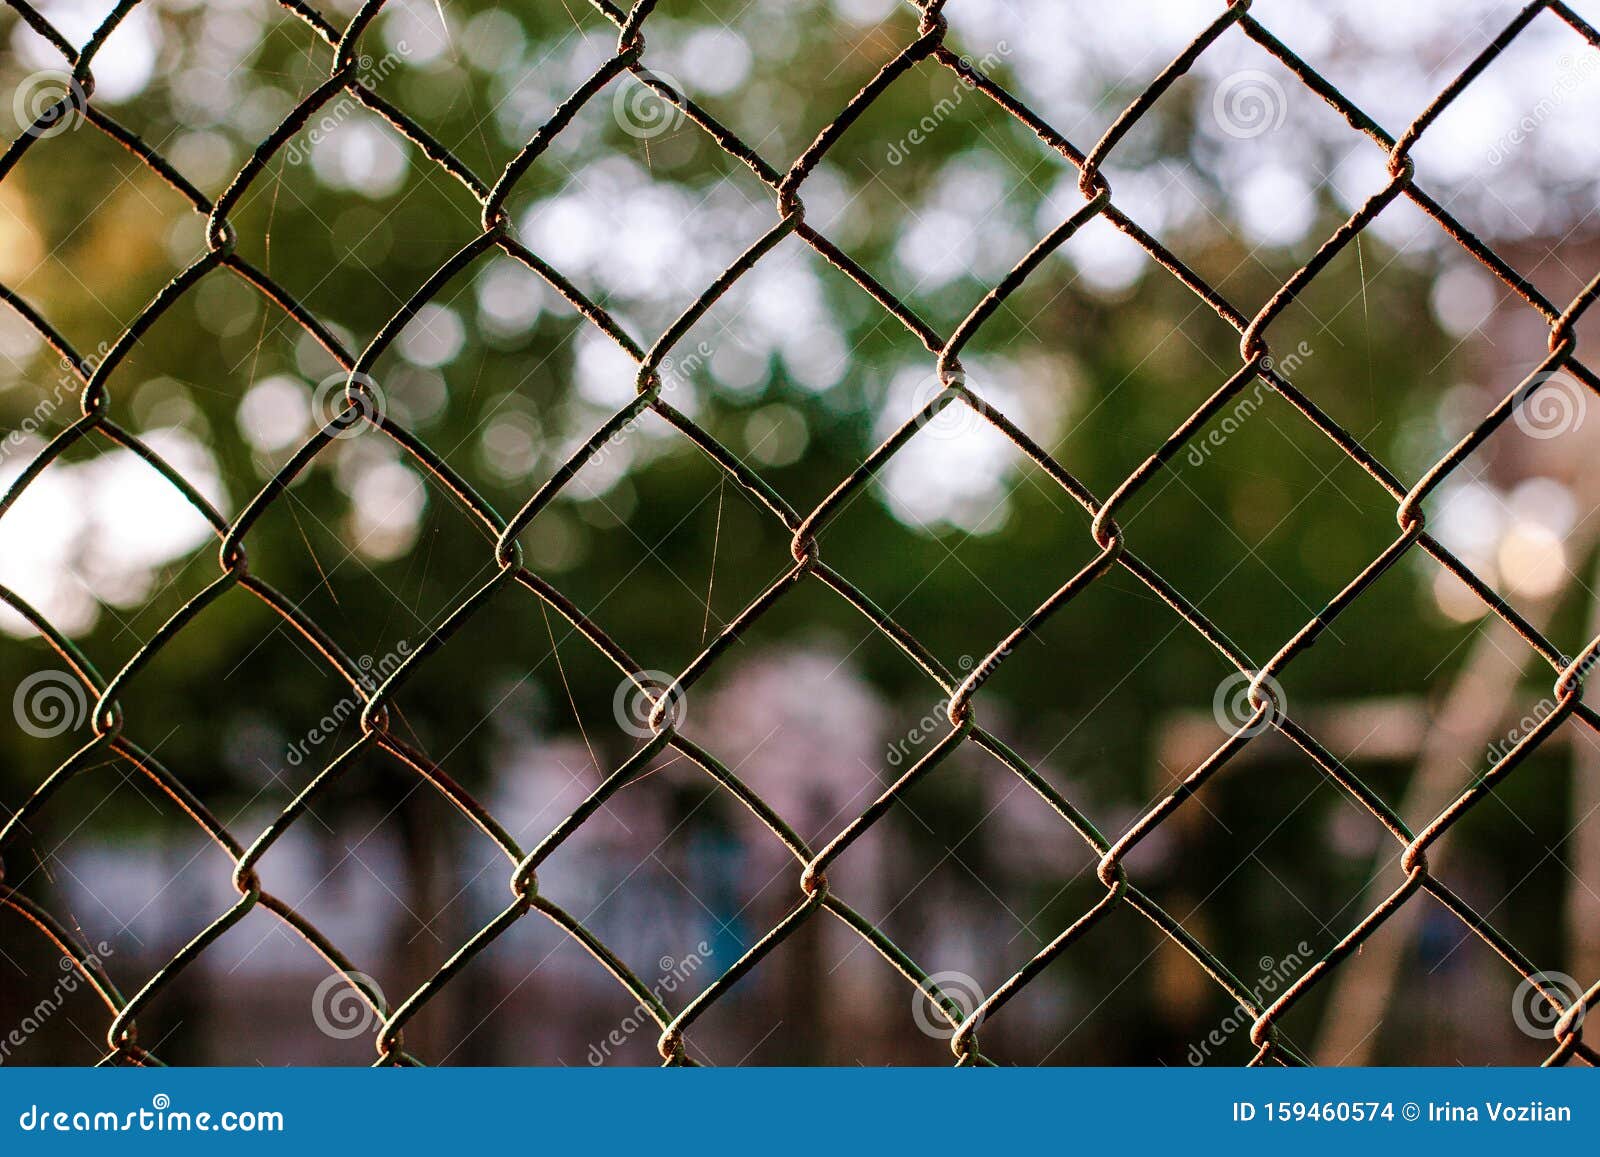 Chain link fence close up stock photo. Image of horizontal - 159460574
